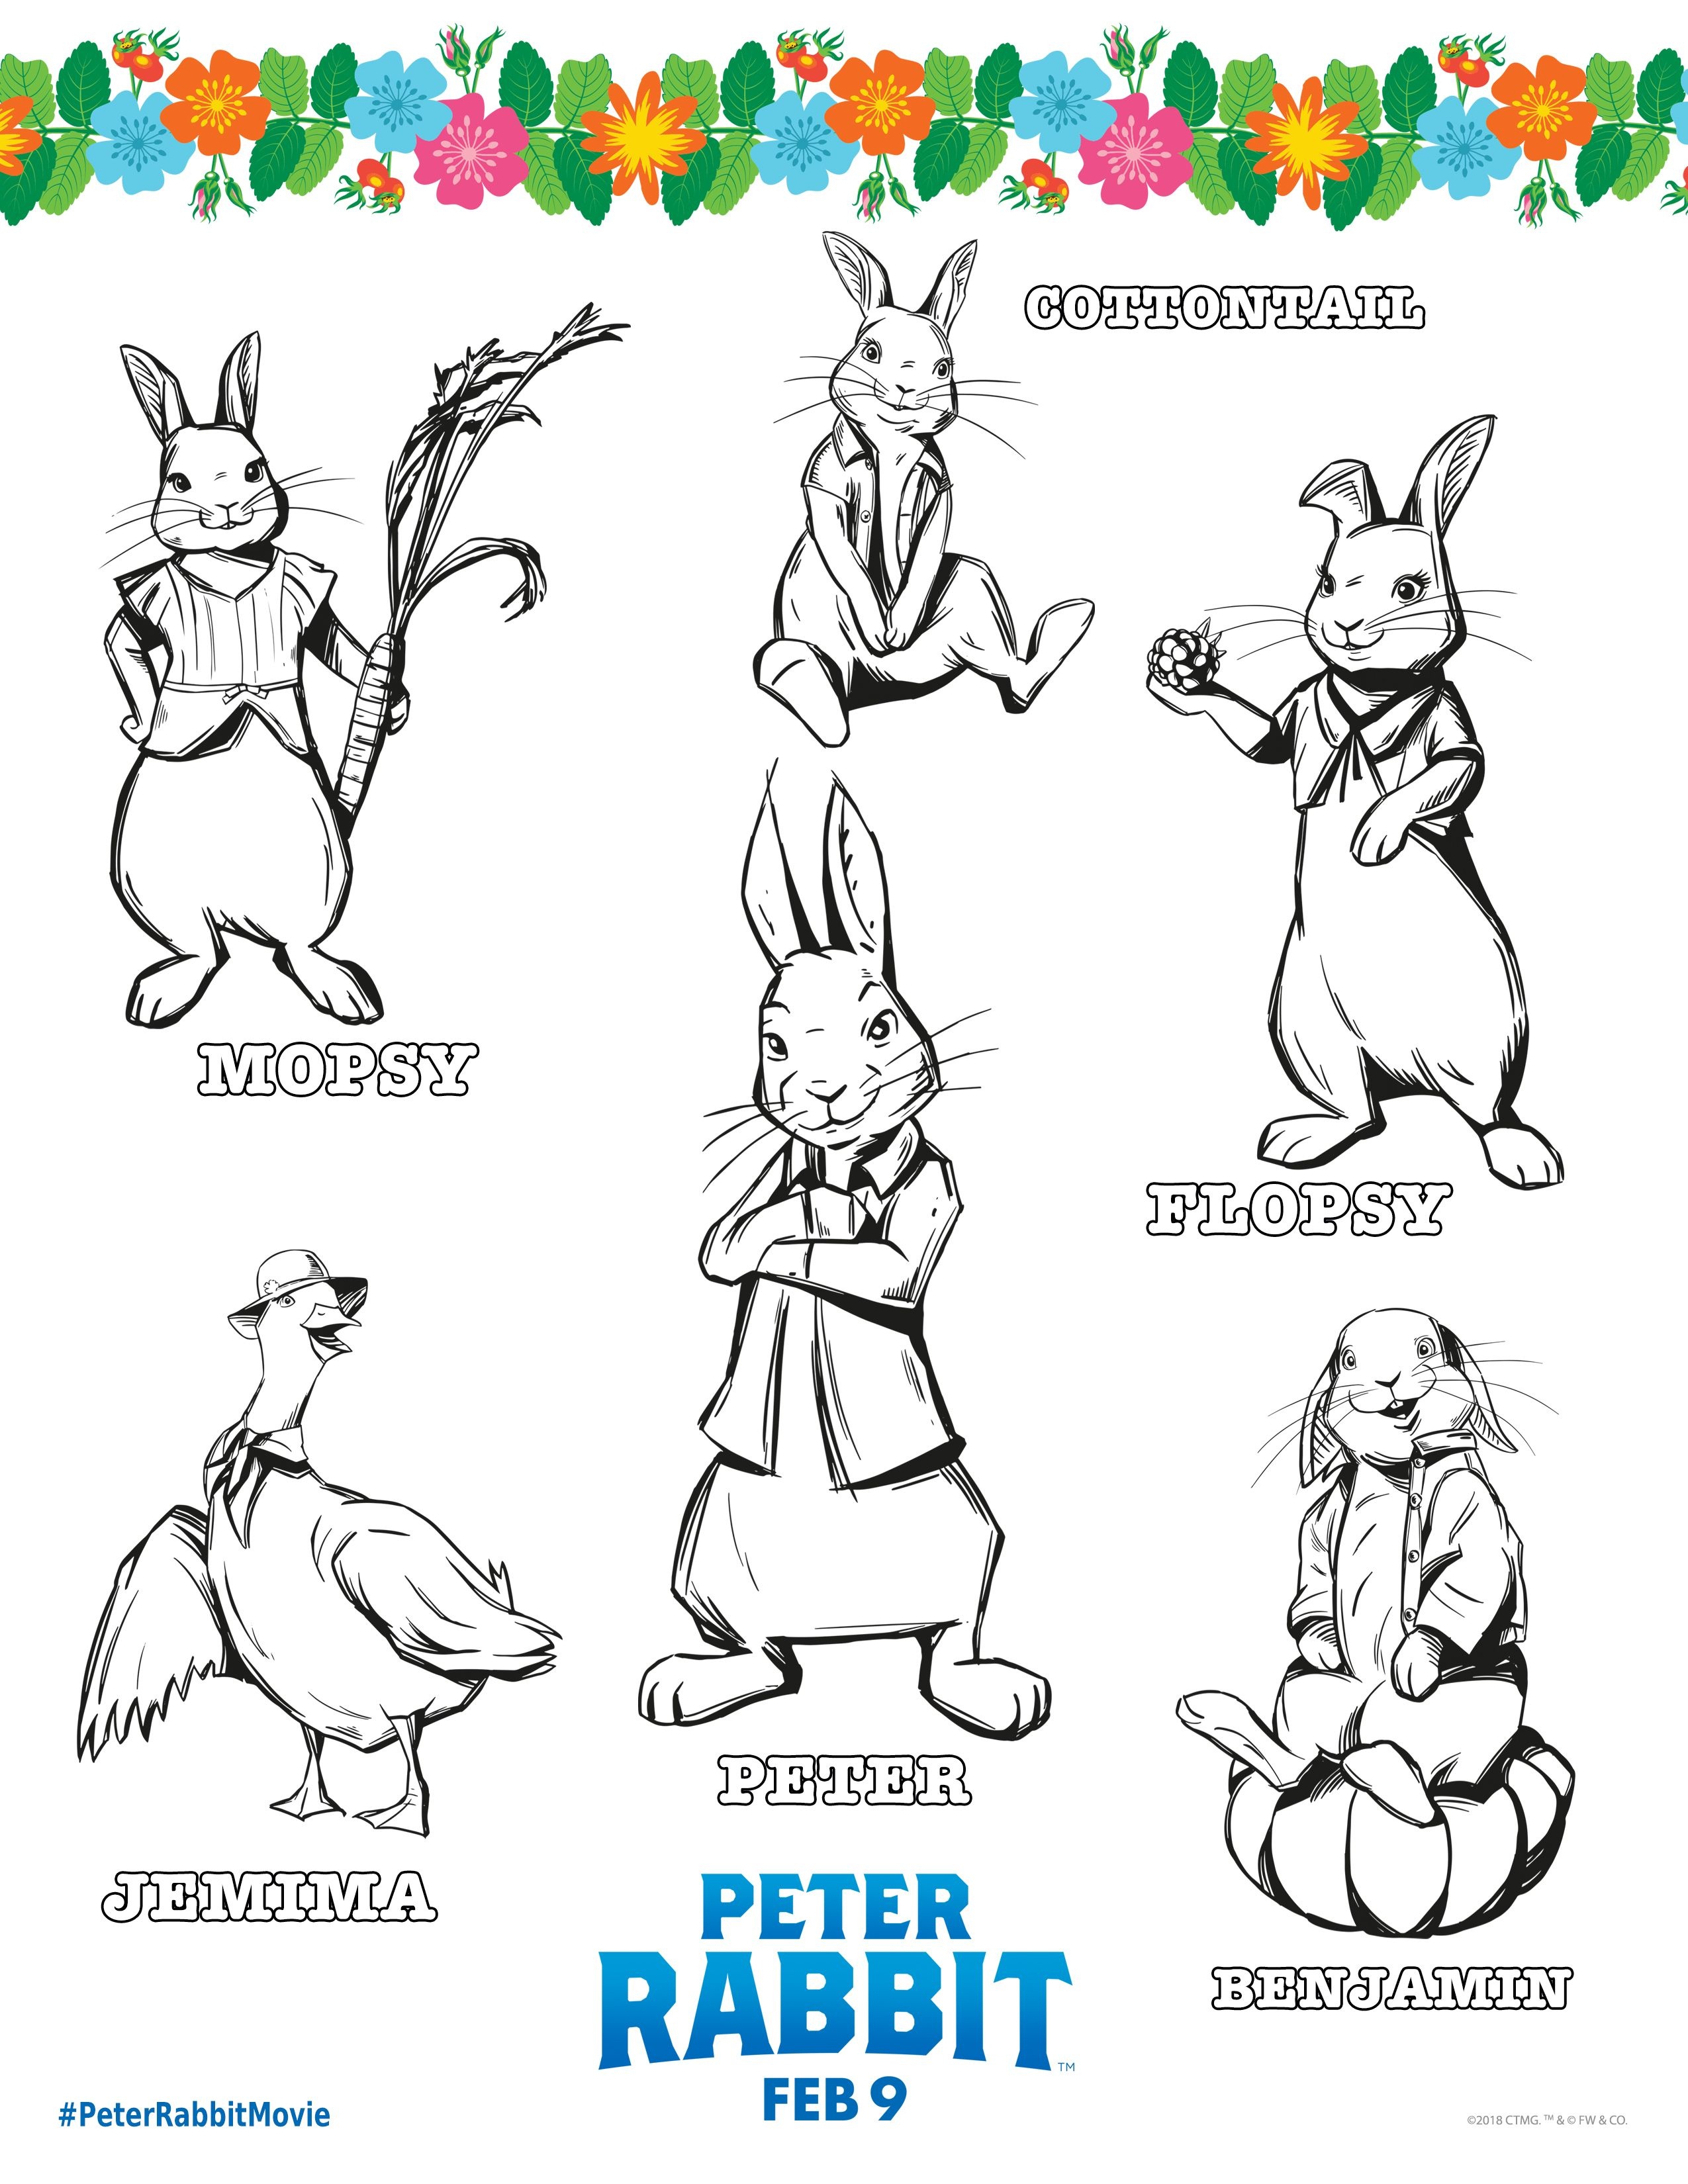 Peter Rabbit Coloring Page | Peter Rabbit | Peter Rabbit, Rabbit - Free Printable Peter Rabbit Coloring Pages